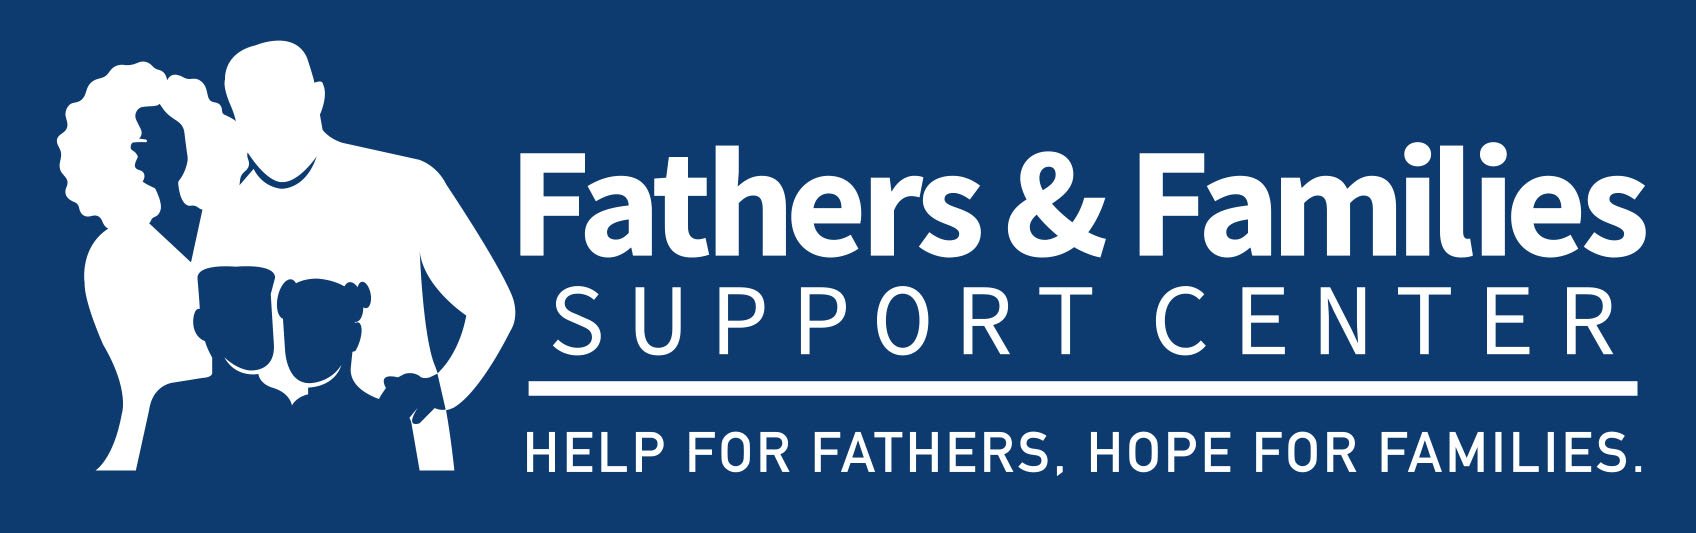 Fathers-Families-Support-Center.jpg